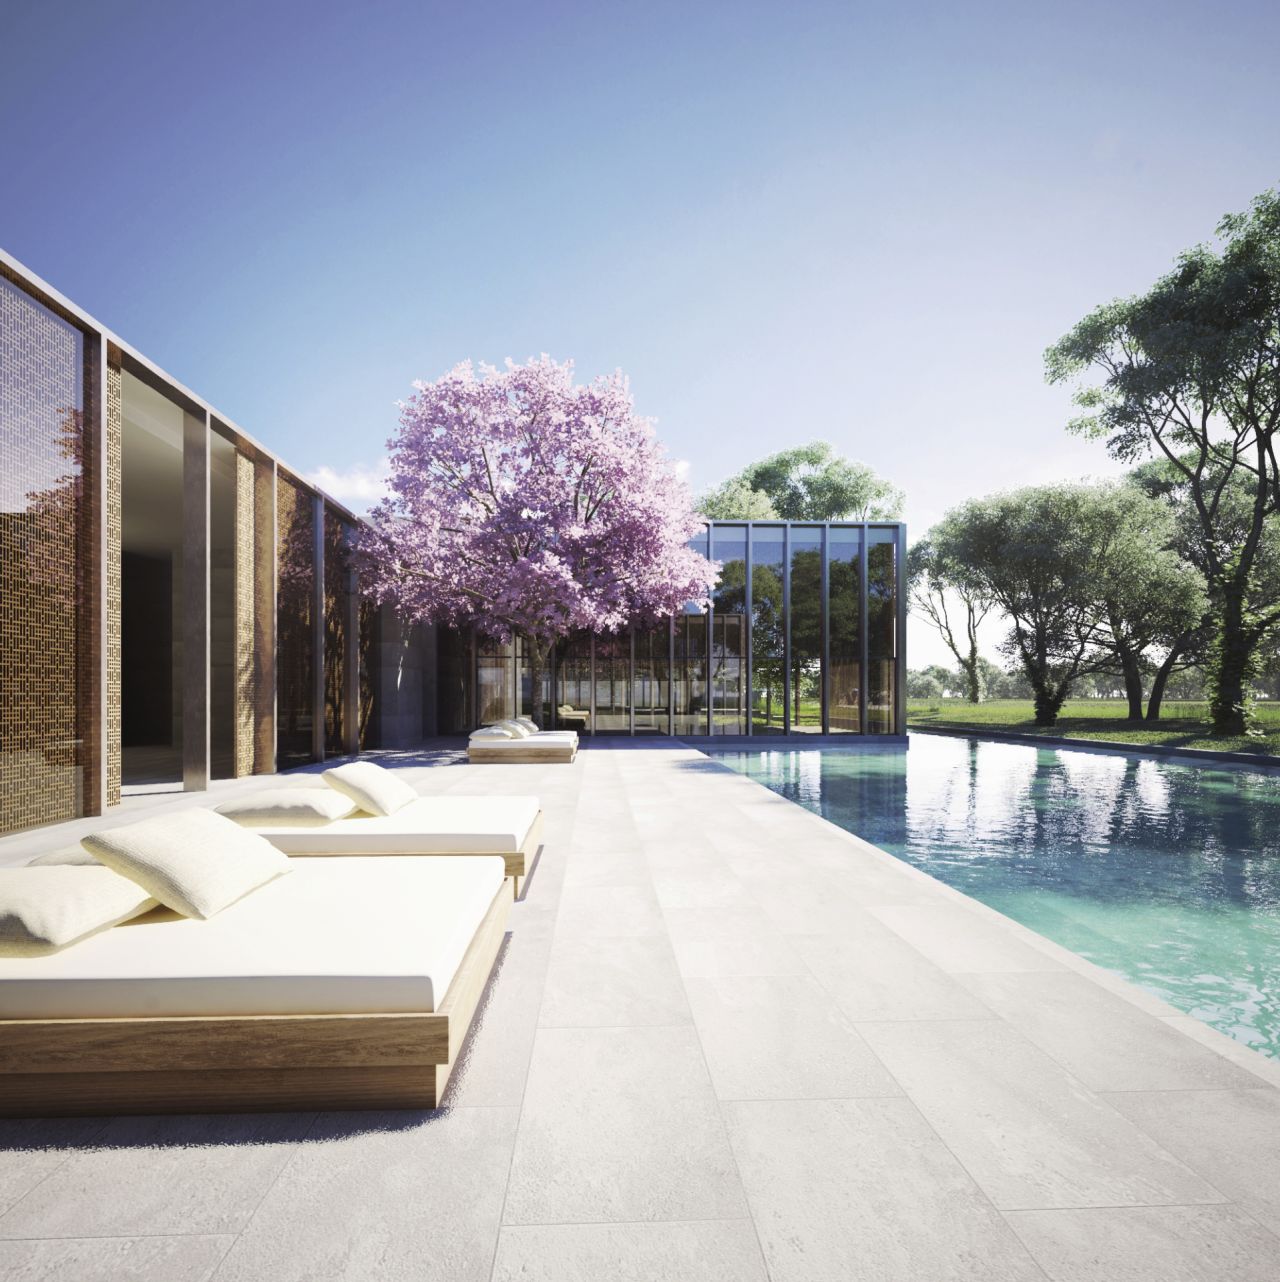 <strong>Amanyangyun, Shanghai, China: </strong>Designed by Kerry Hill Architects, the 26 cottages have been modernized to balance old and new, including both antique carvings and private courtyards alongside private pools and Jacuzzis.